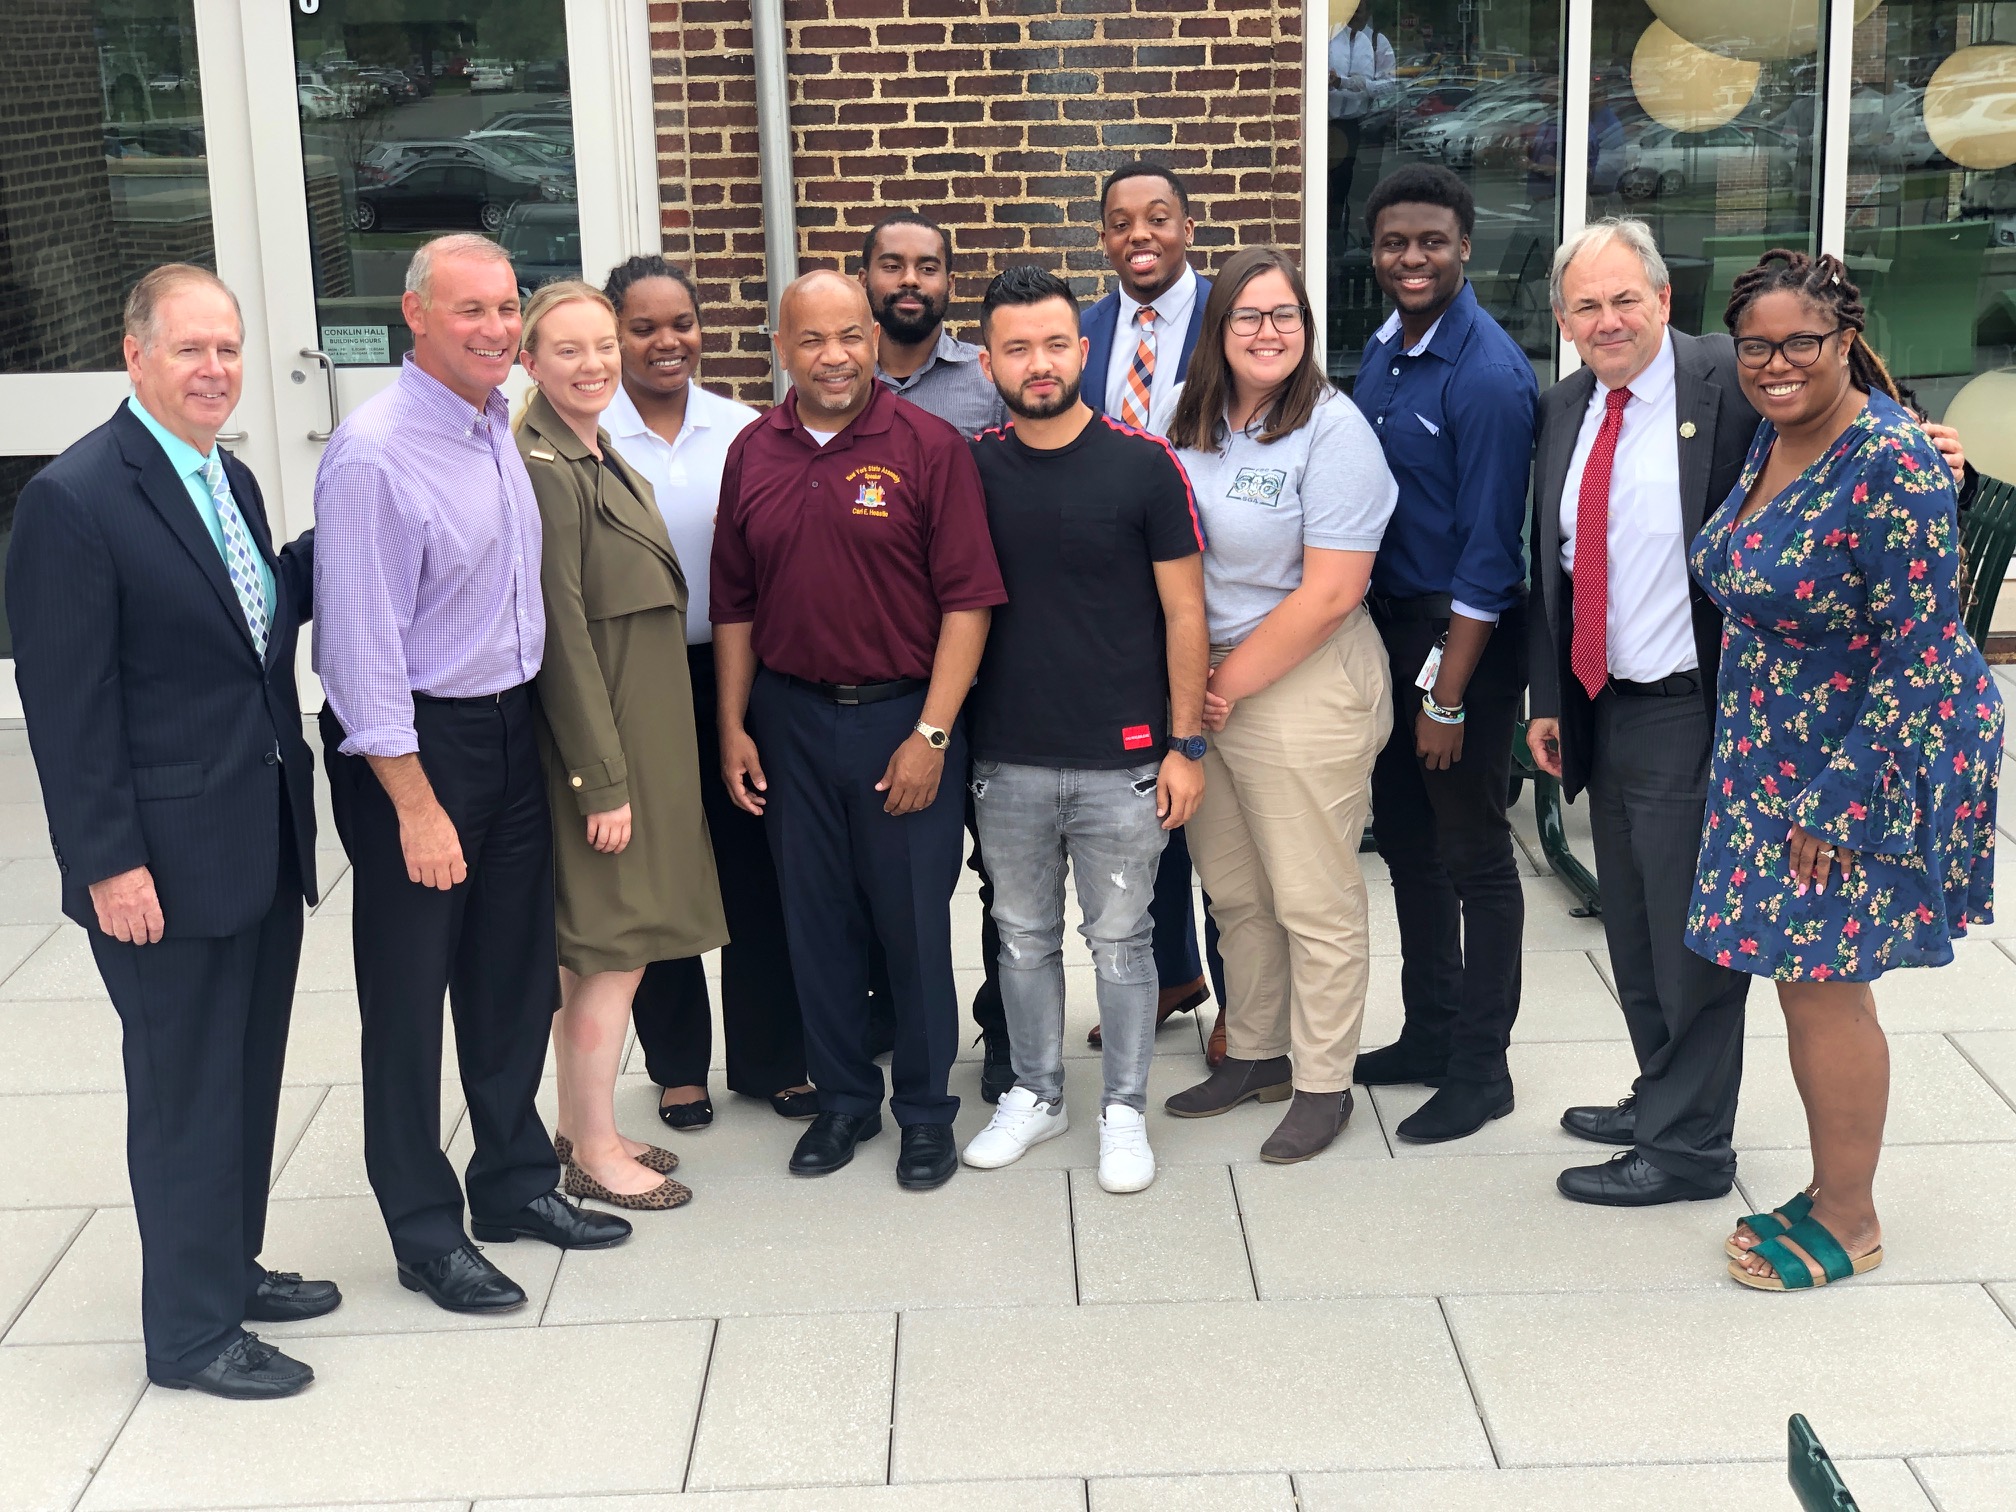 Pictured with Speaker Heastie in the third photo at Farmingdale State College is (from left to right): Farmingdale State College Vice President for Institutional Advancement Patrick Calabria, Assemblymember Steve Stern, members of the Student Senate, Farm